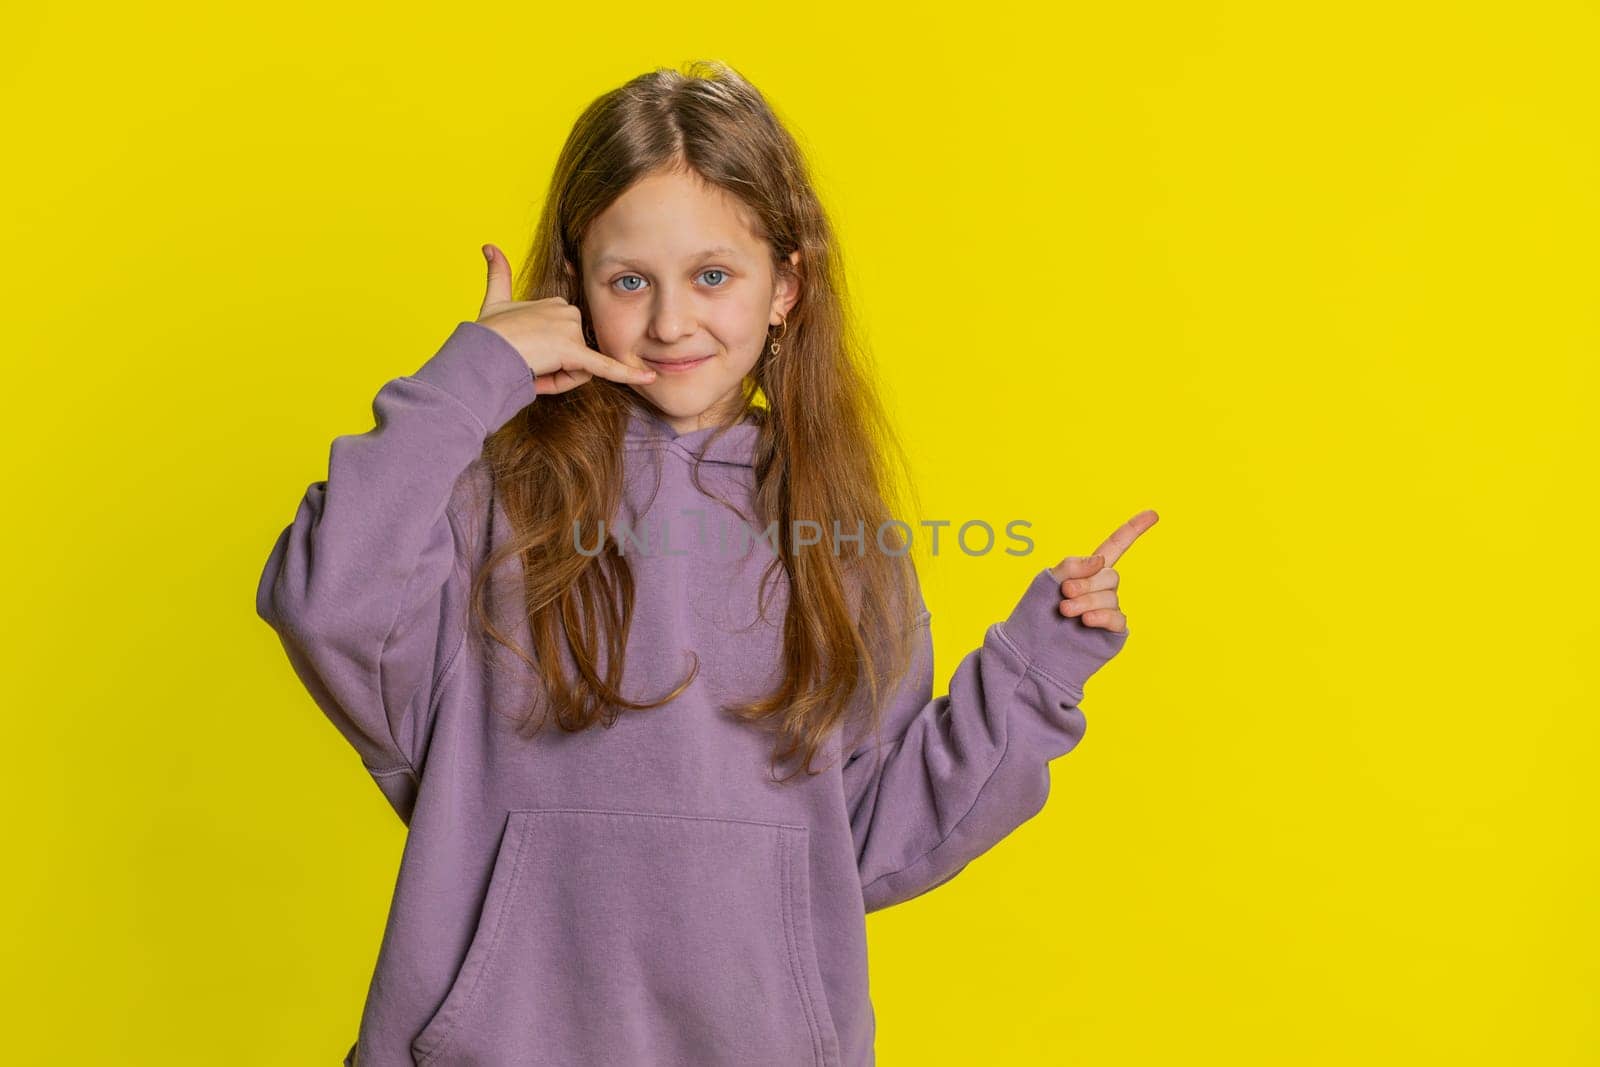 Call me, here is contact number. Preteen child girl kid looking at camera doing phone gesture, asking for conversation. Hotline online service proposition advertisement. Children on yellow background